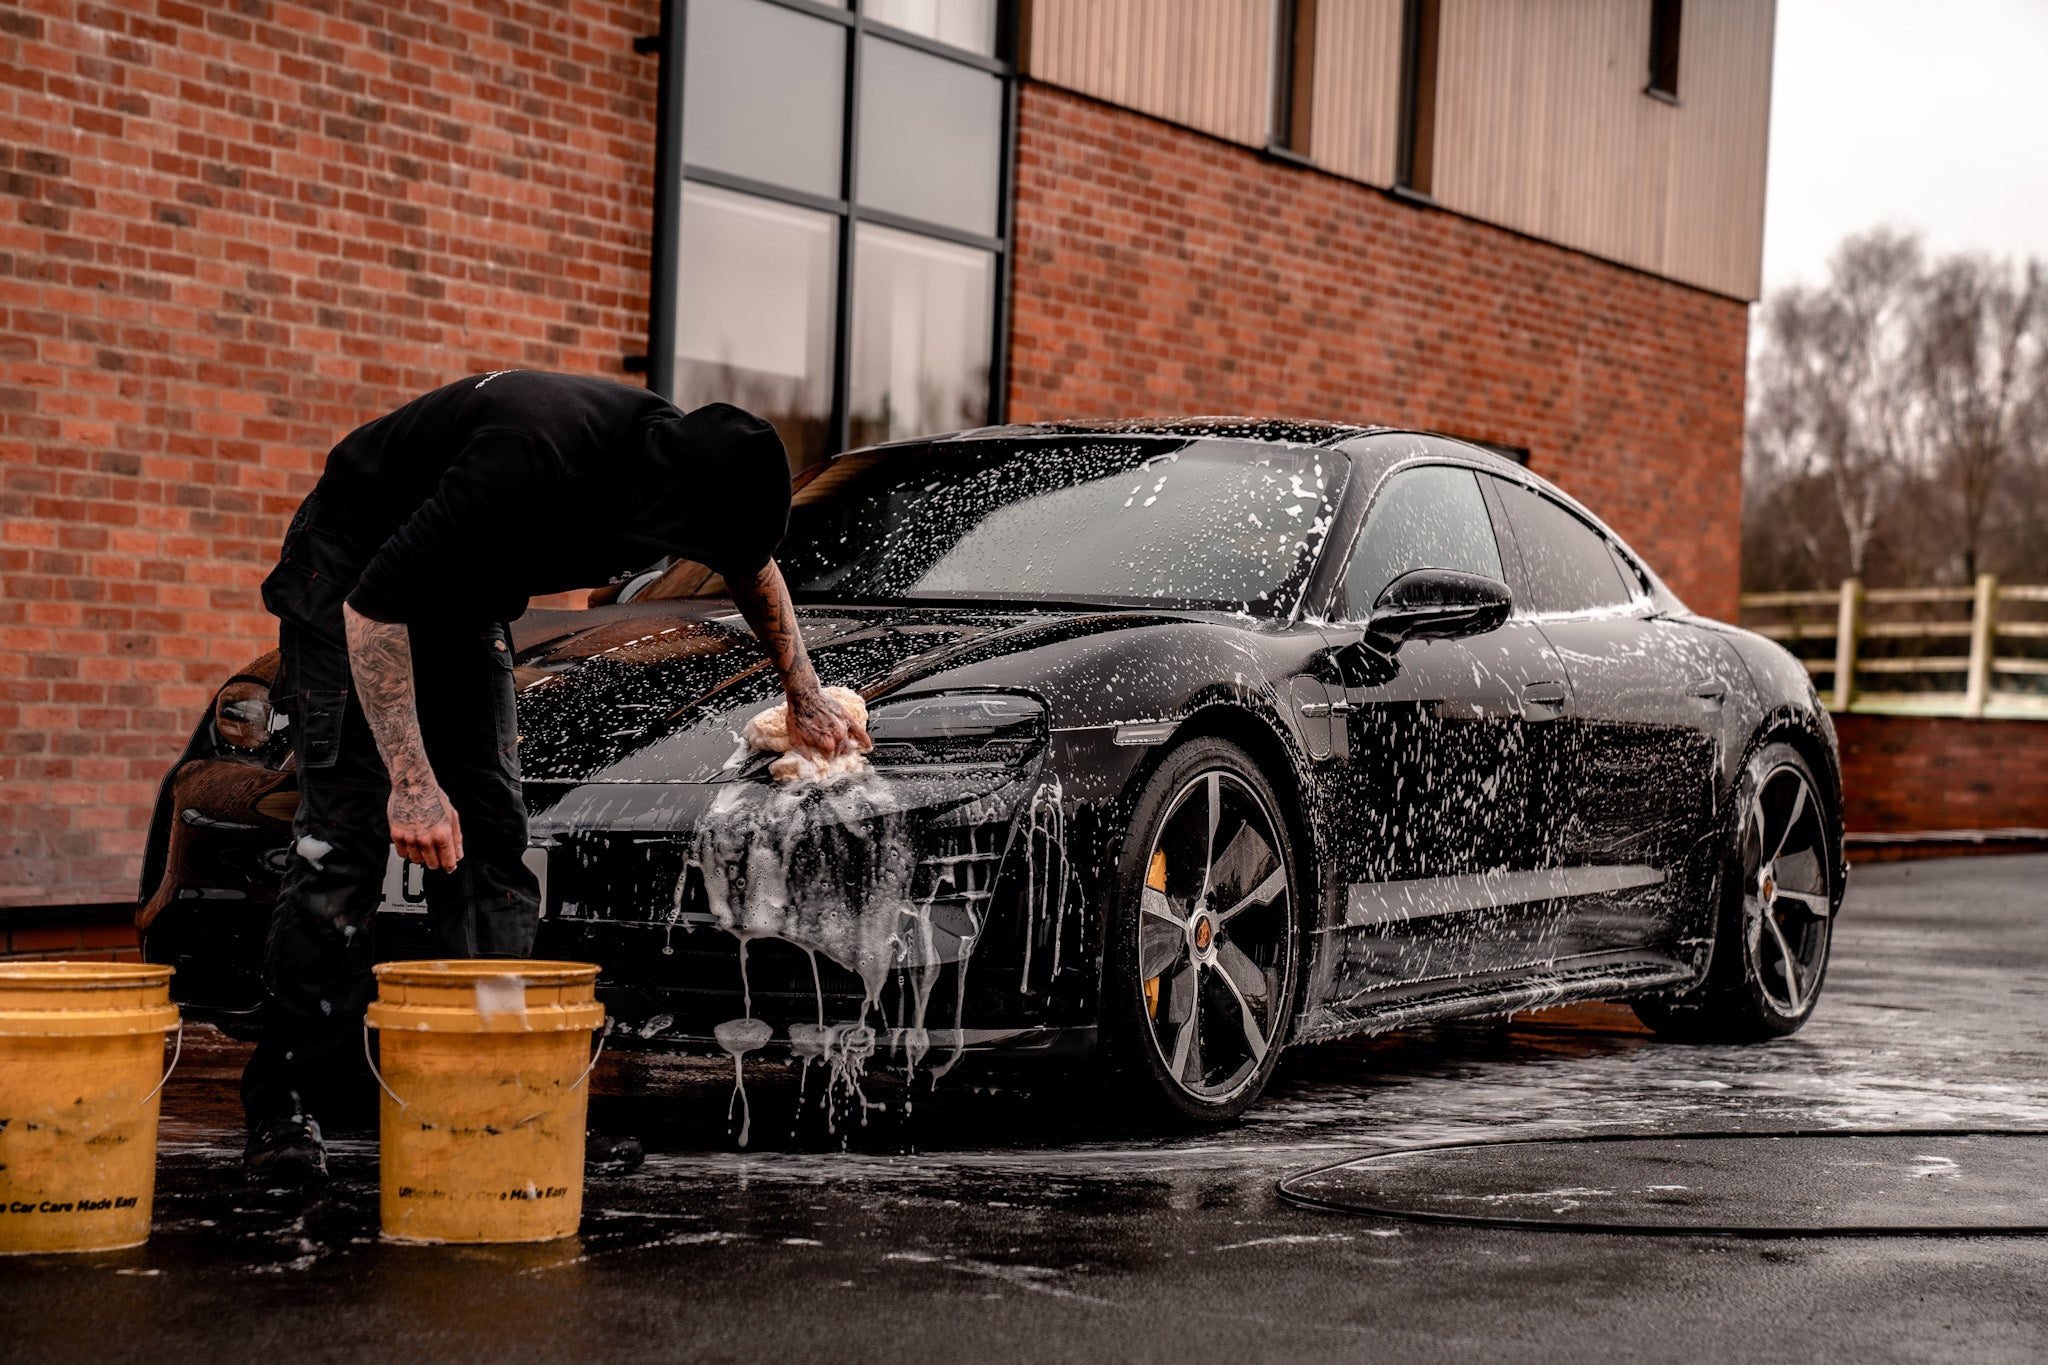 Adam's Graphene Detail Spray (Gallon) - Extend Protection of Waxes,  Sealants, & Coatings | Waterless Detailer Spray For Car Detailing | Clay  Bar